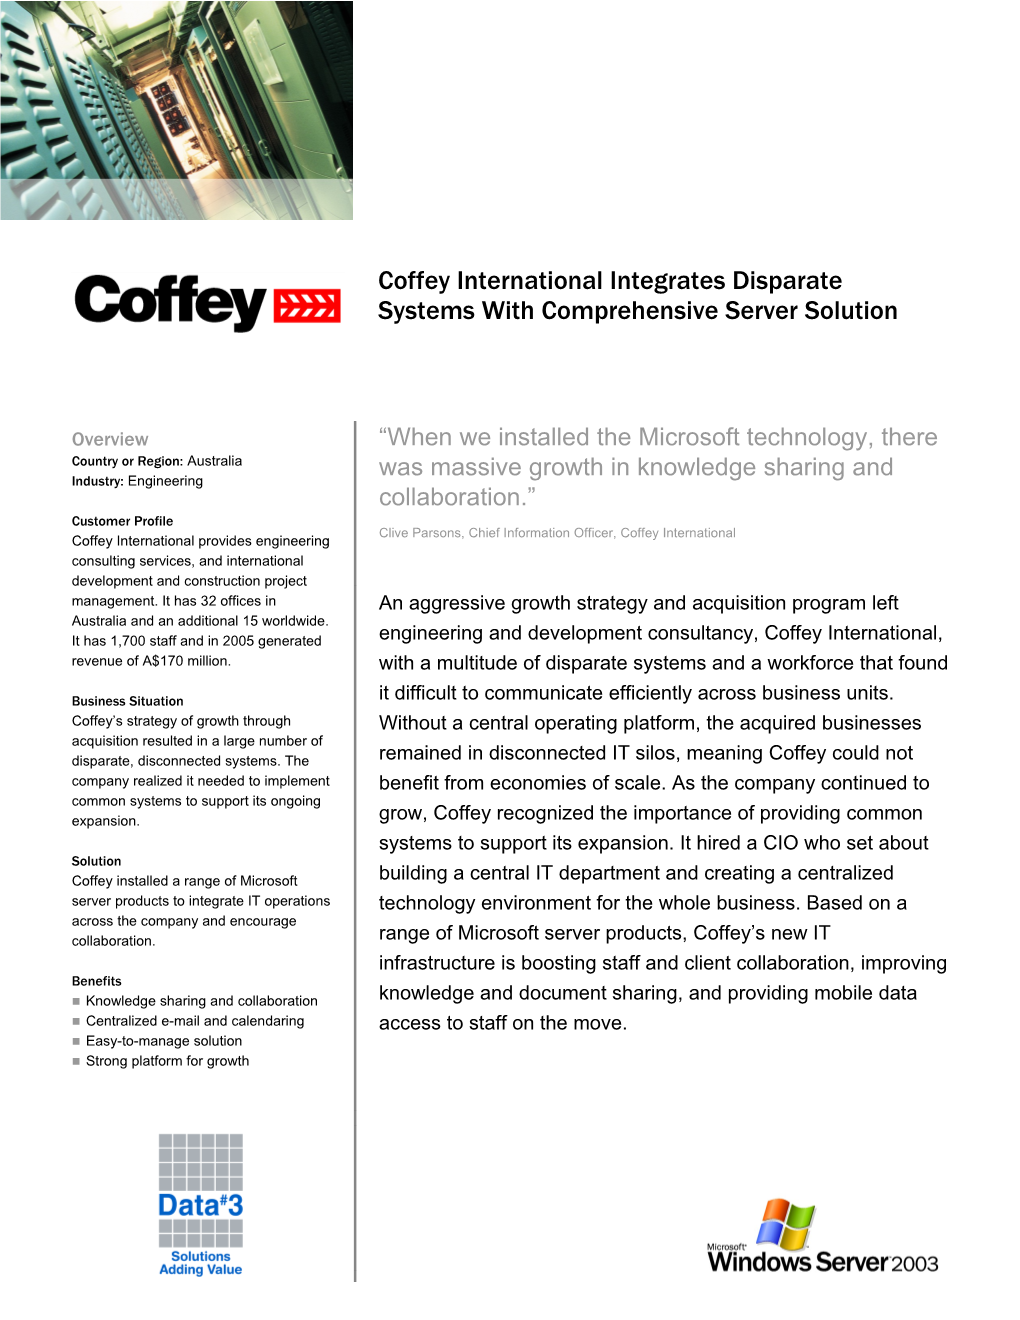 Coffey International Integrates Disparate Systems with Comprehensive Server Solution